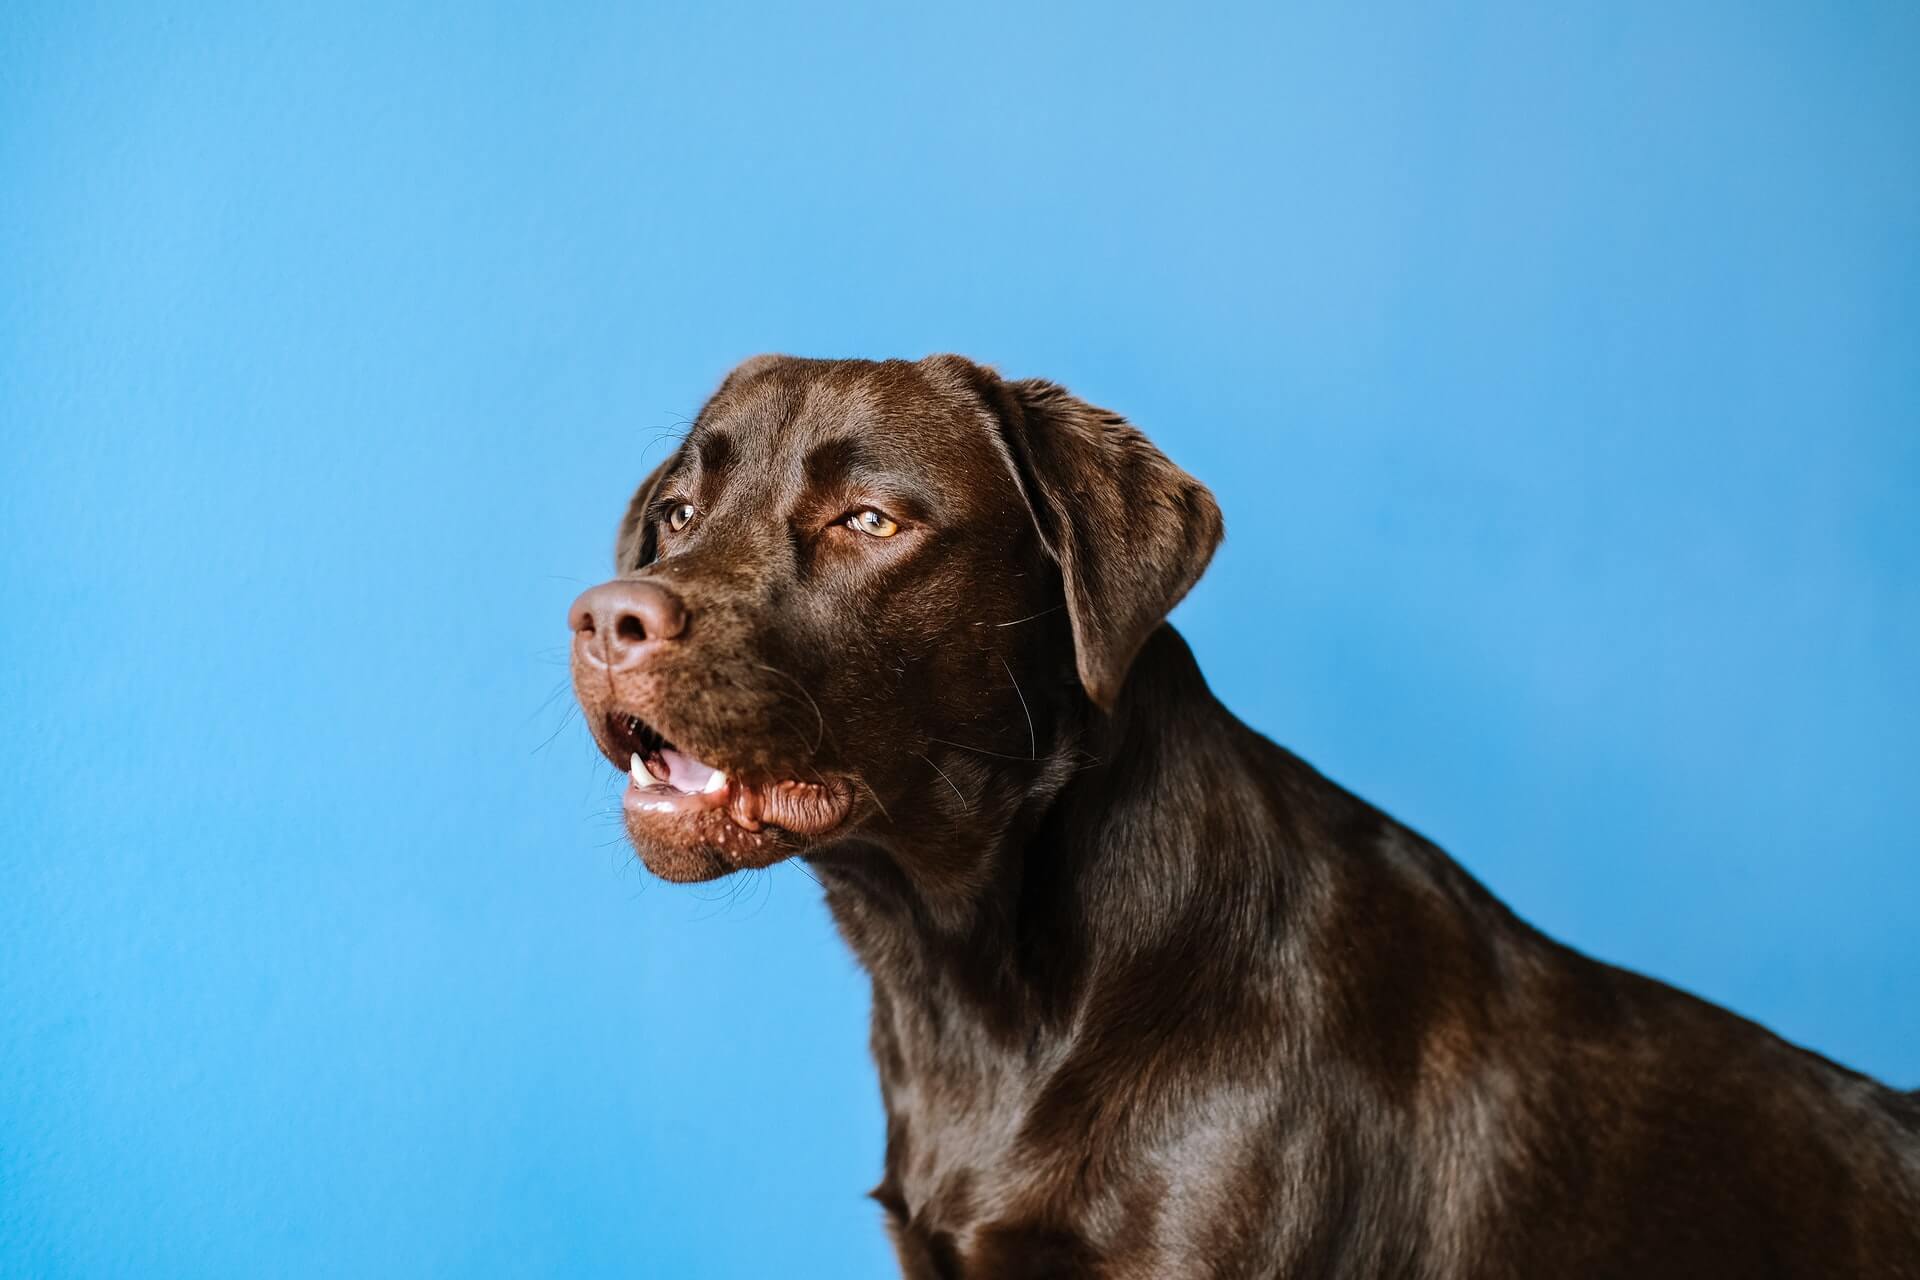 Chocolate Labrador Retriever against a blue background showing why Labrador haircuts are not recommended.